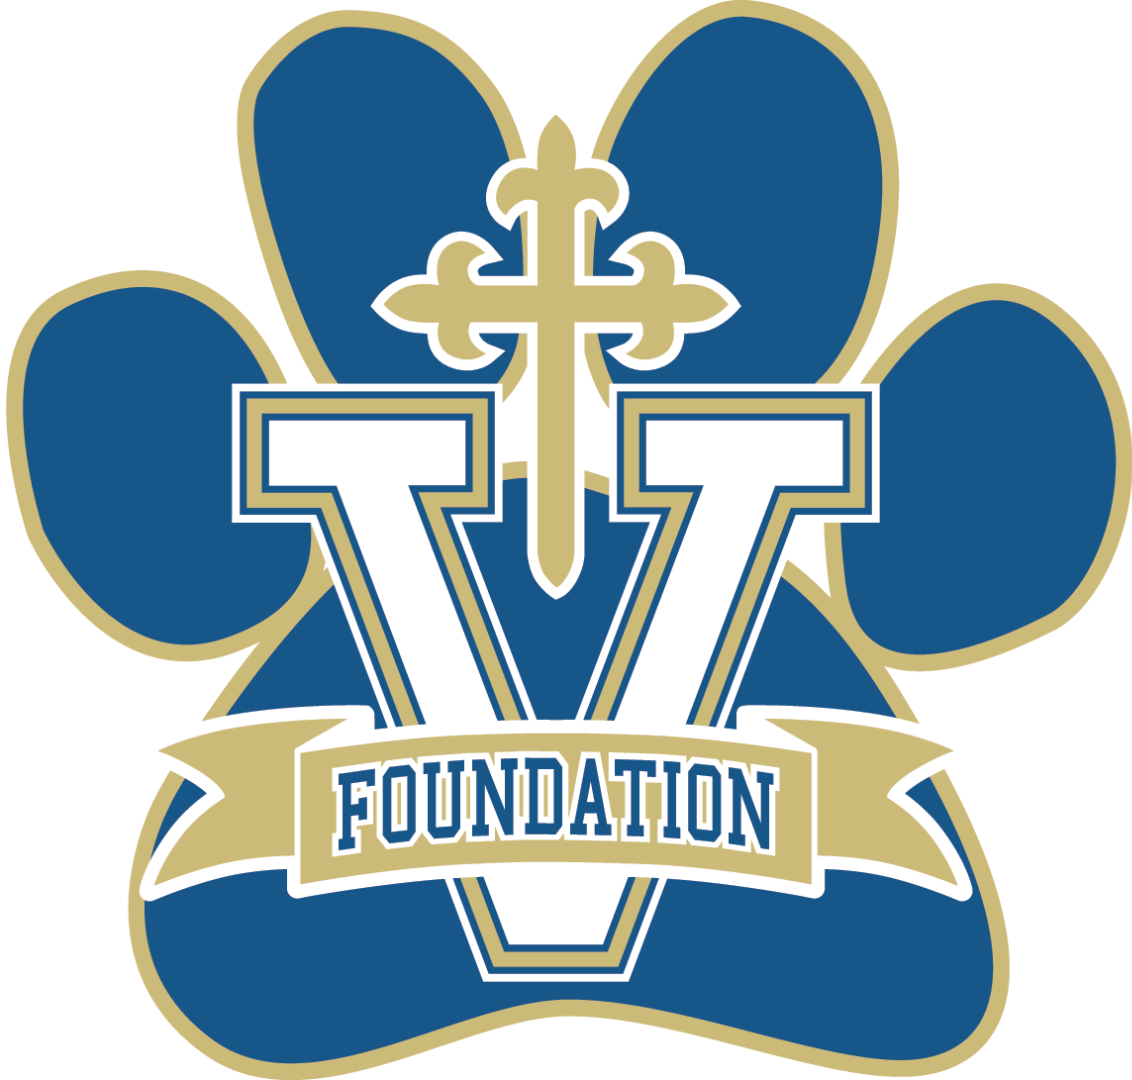 A logo for the foundation with a paw print and a cross